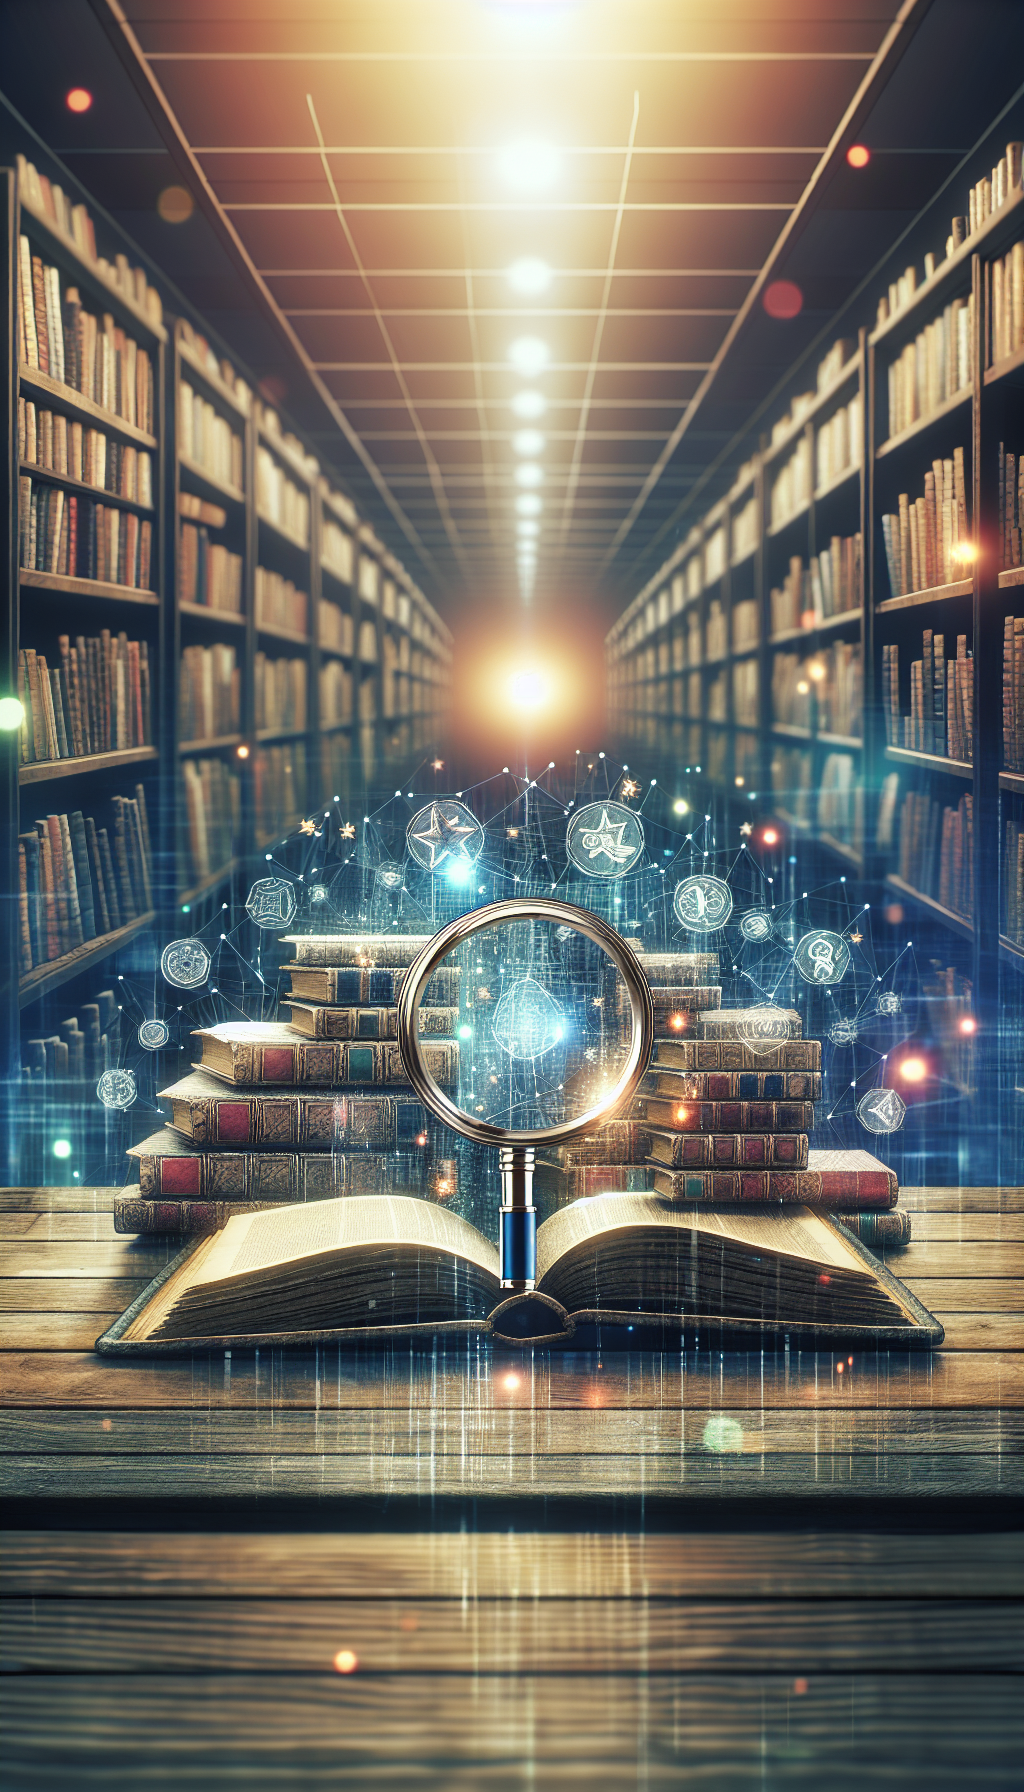 An illustration features a magnifying glass hovering over a variety of antique books, each emitting a soft glow. The magnifier lens reveals hidden treasures and values within the pages, while in the background, a faded library or bookshop provides the setting. Elements of digital icons like stars or currencies subtly blend with classic woodcut or etching to show the appraisal's professional aspect.